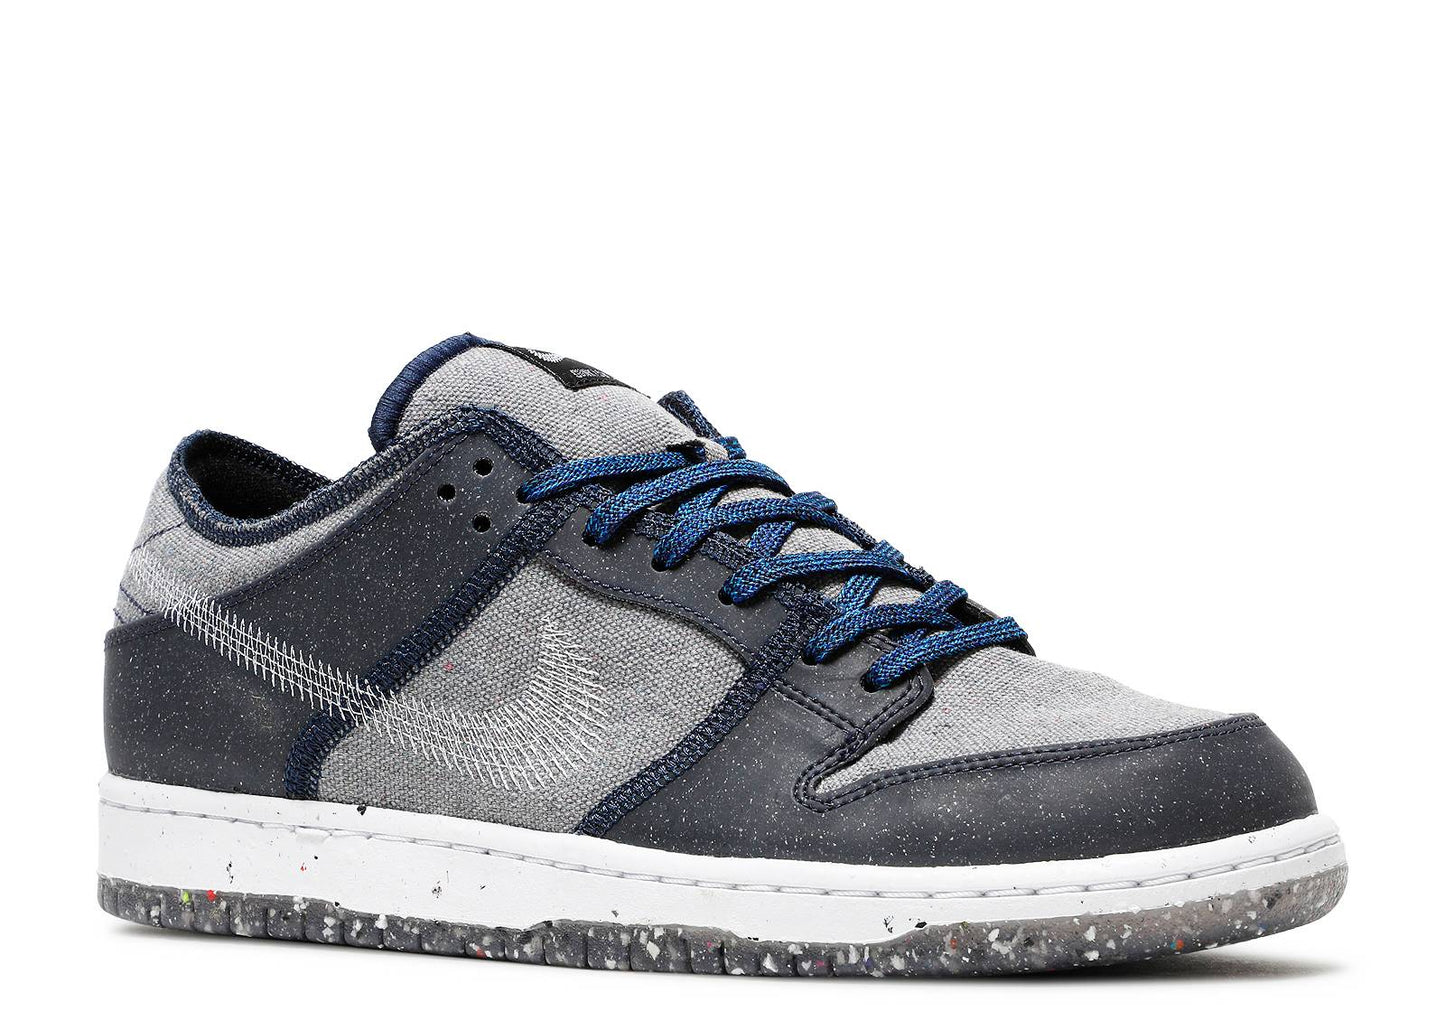 Nike SB Dunk Low Pro "Crater"